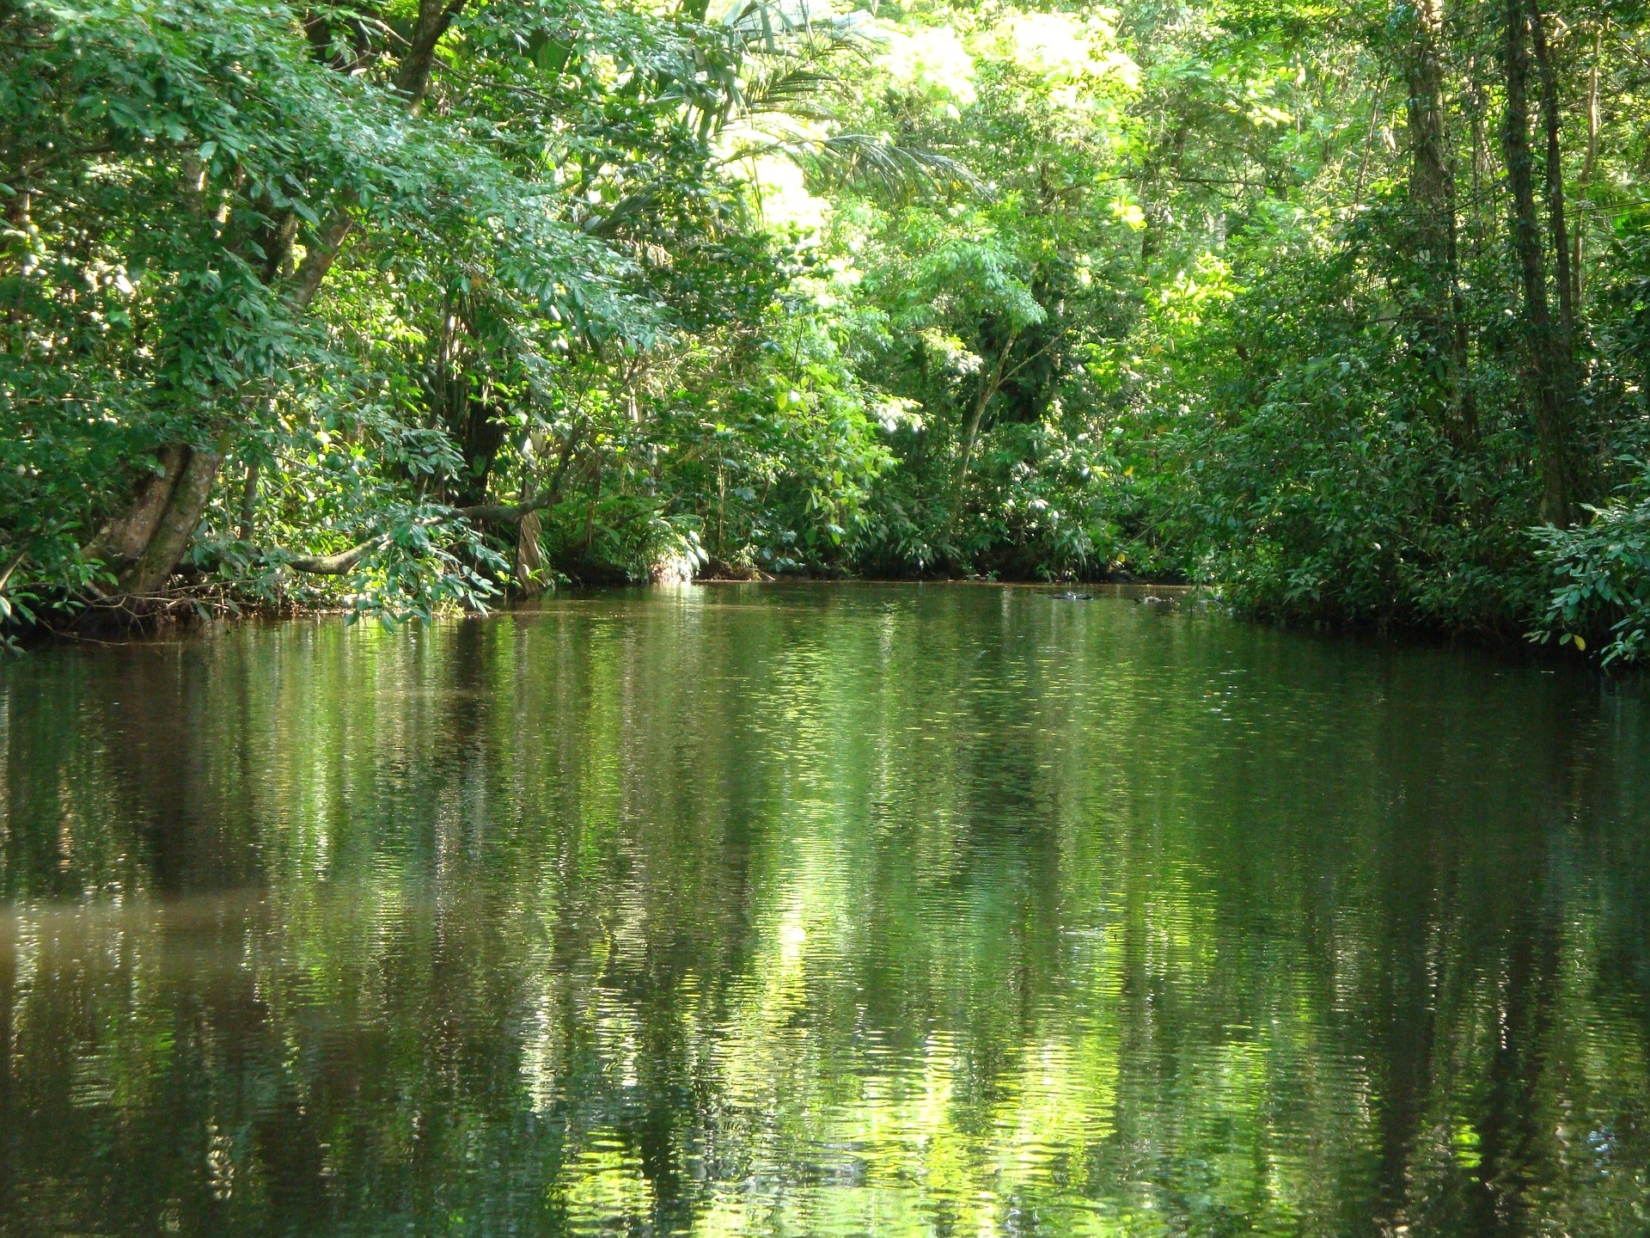 Tortuguero River surrounded by green trees during the daytime